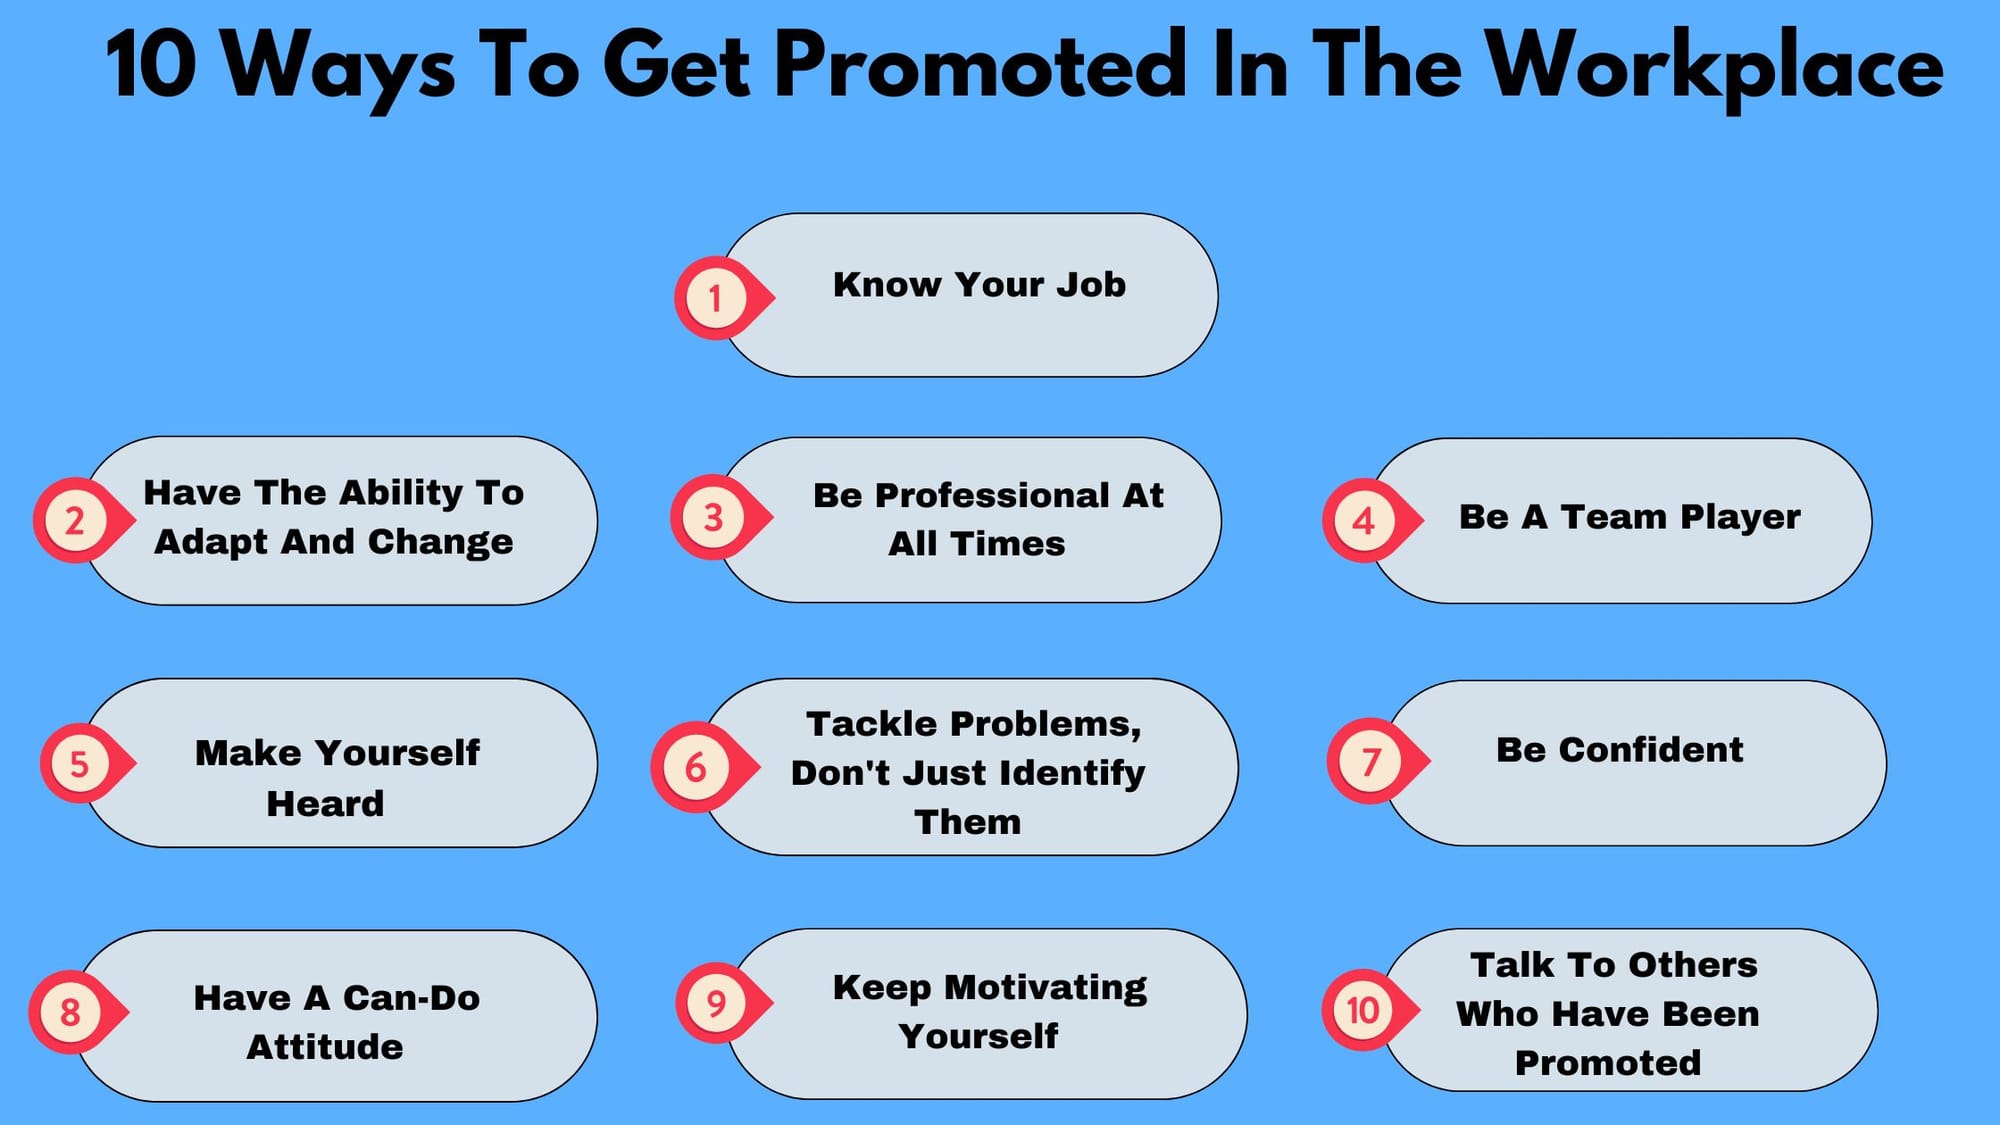 10 Ways To Get Promoted In The Workplace?